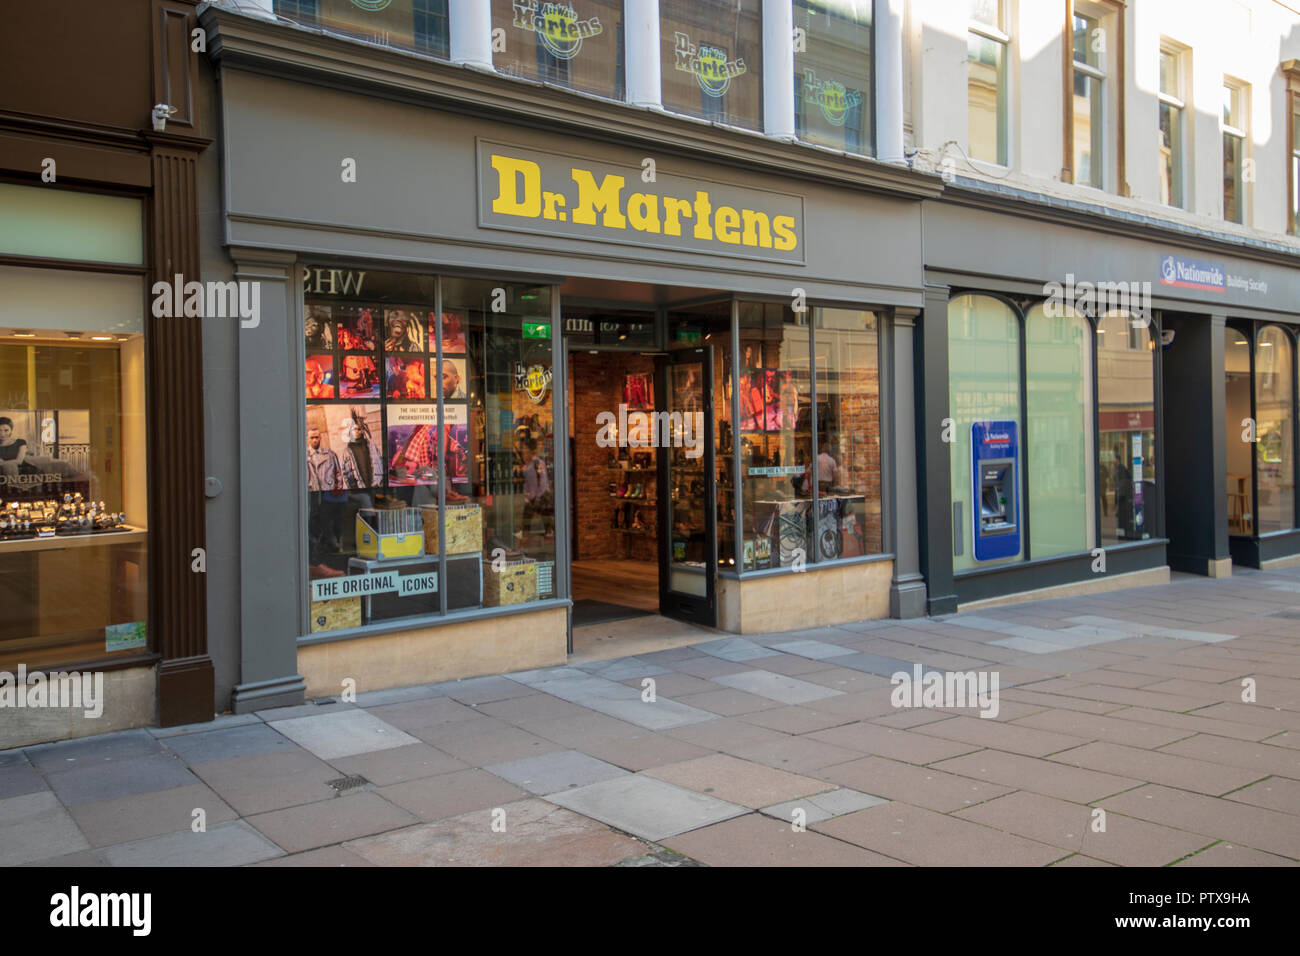 Dr Martens shoe and boot shop in union street, Bath UK Stock Photo - Alamy